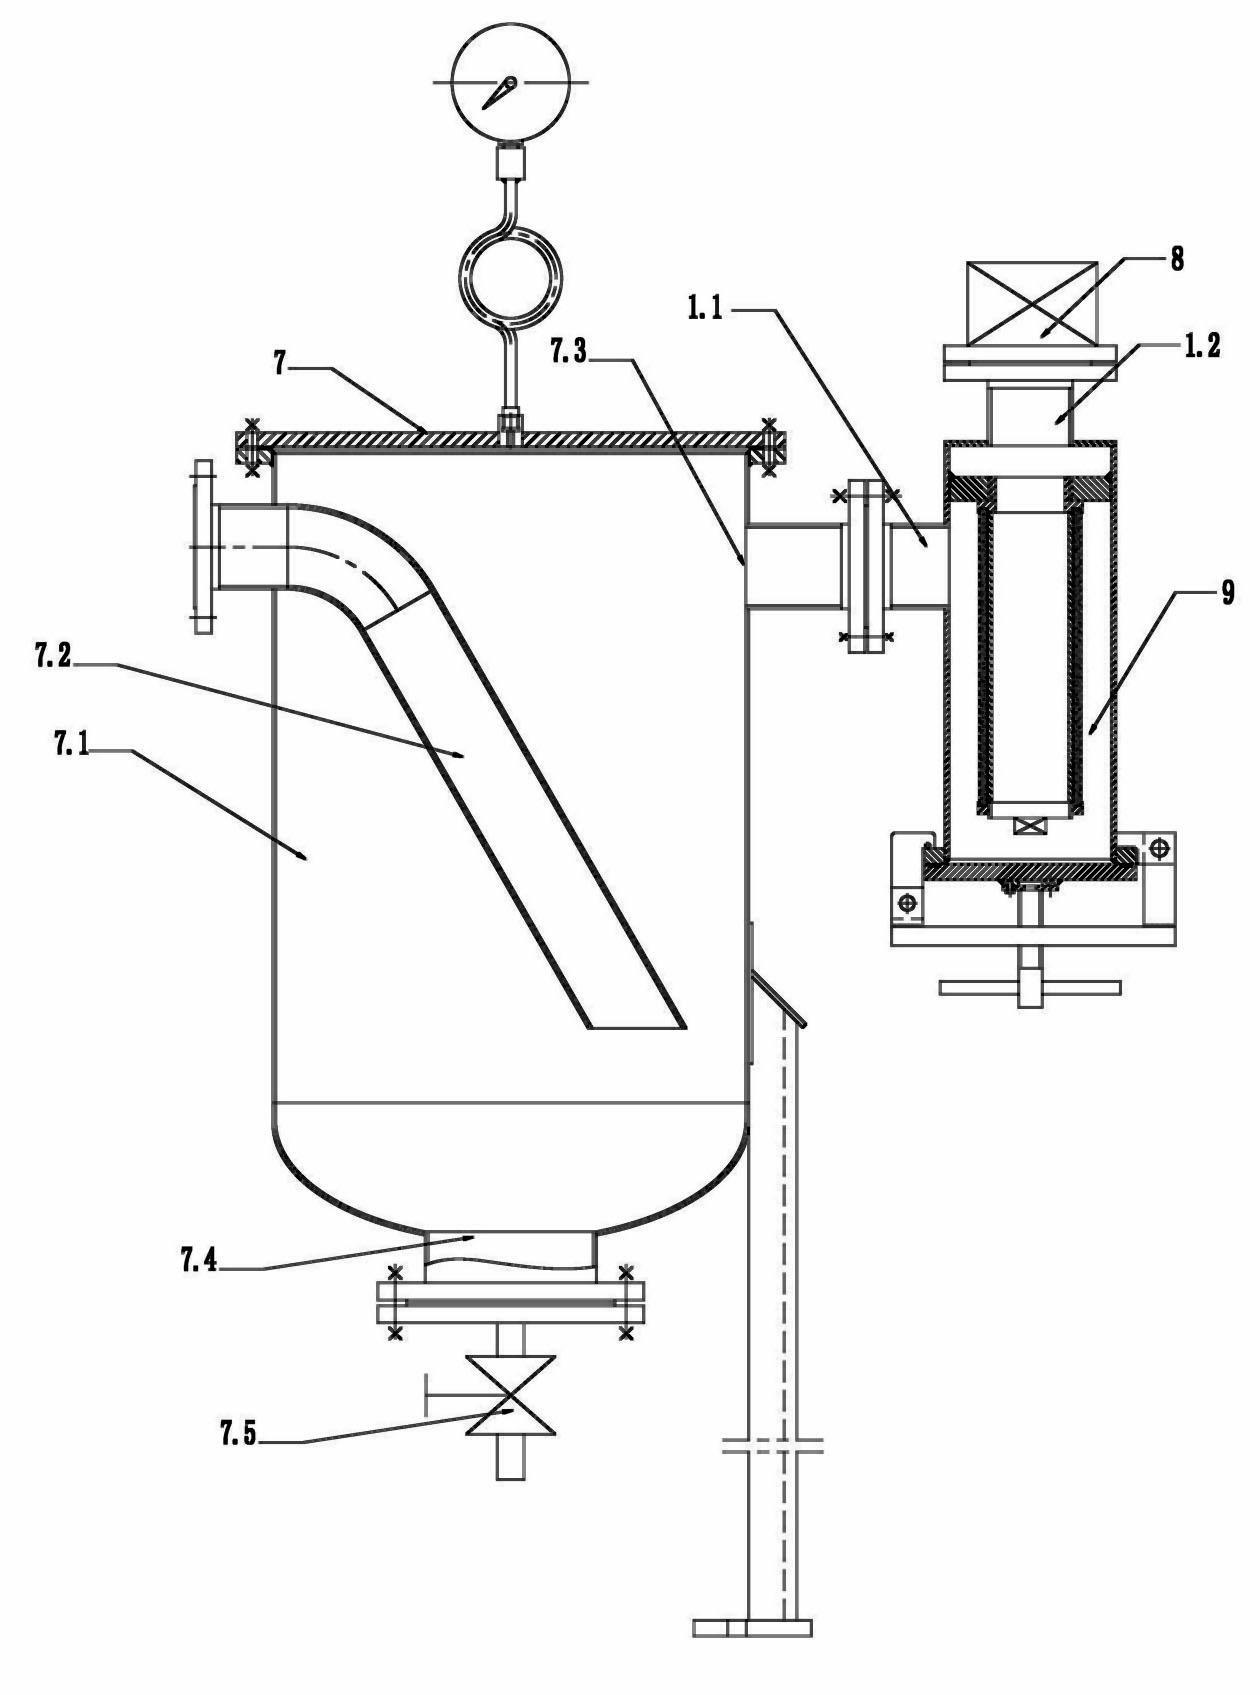 A dust removal device for a vacuum dryer